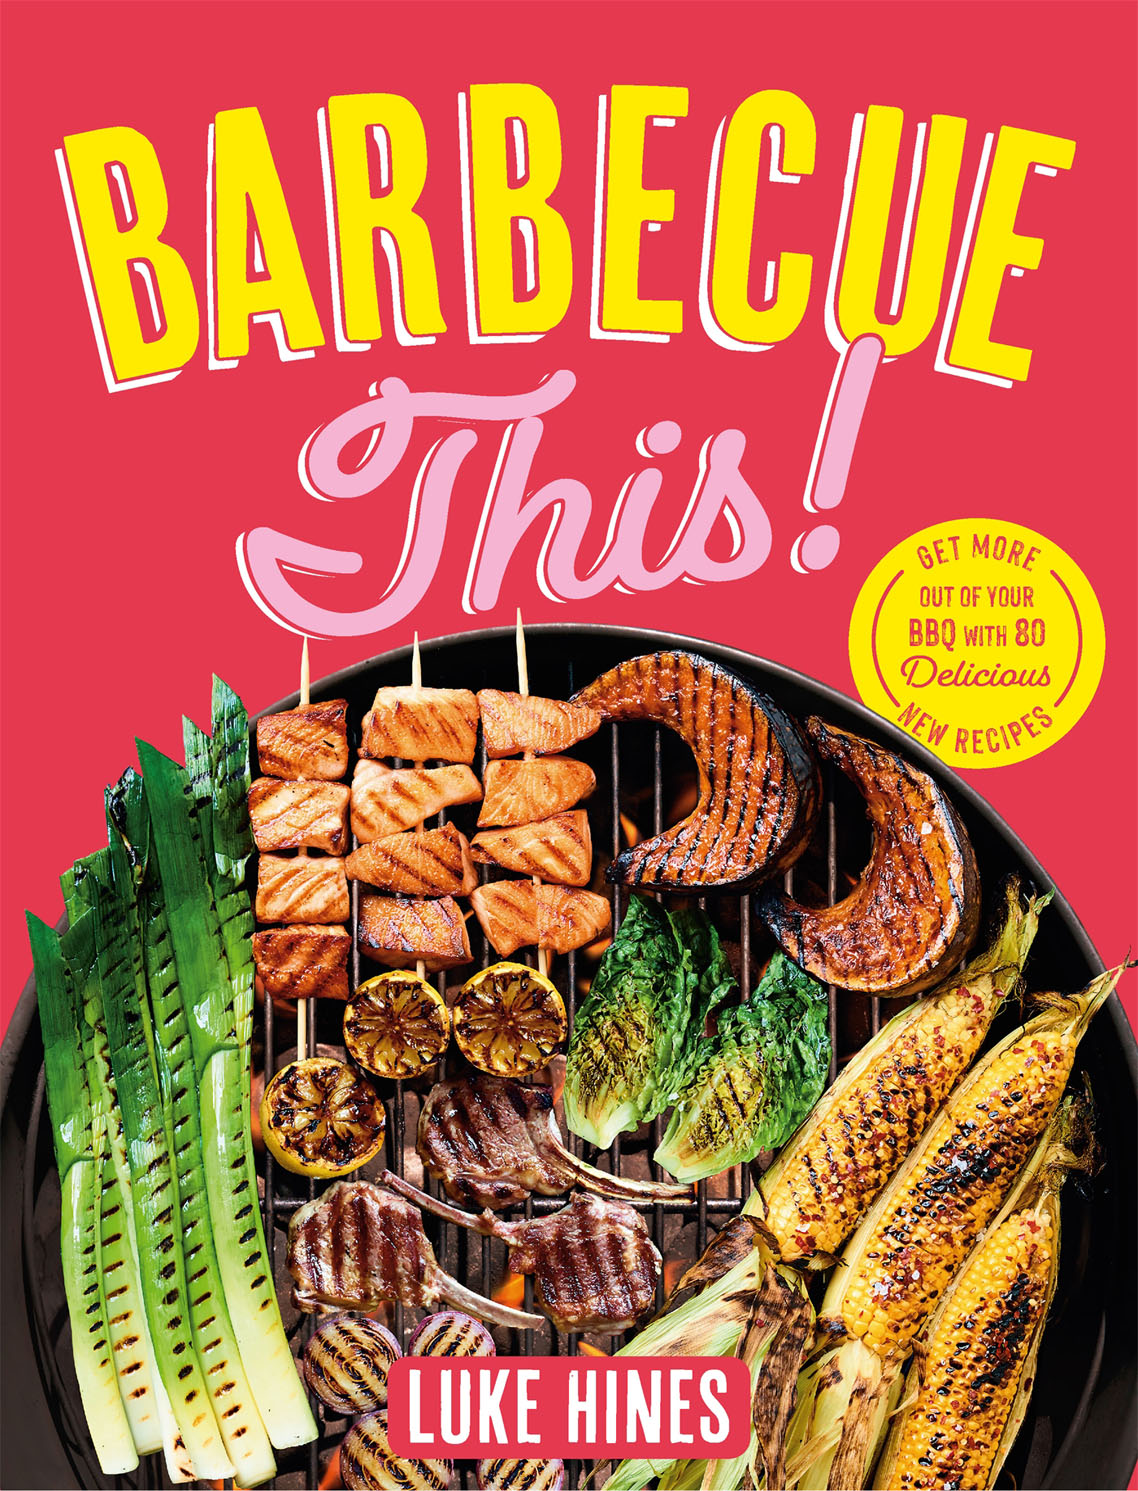 Barbecue This Get more out of your BBQ with 80 delicious new recipes - photo 1